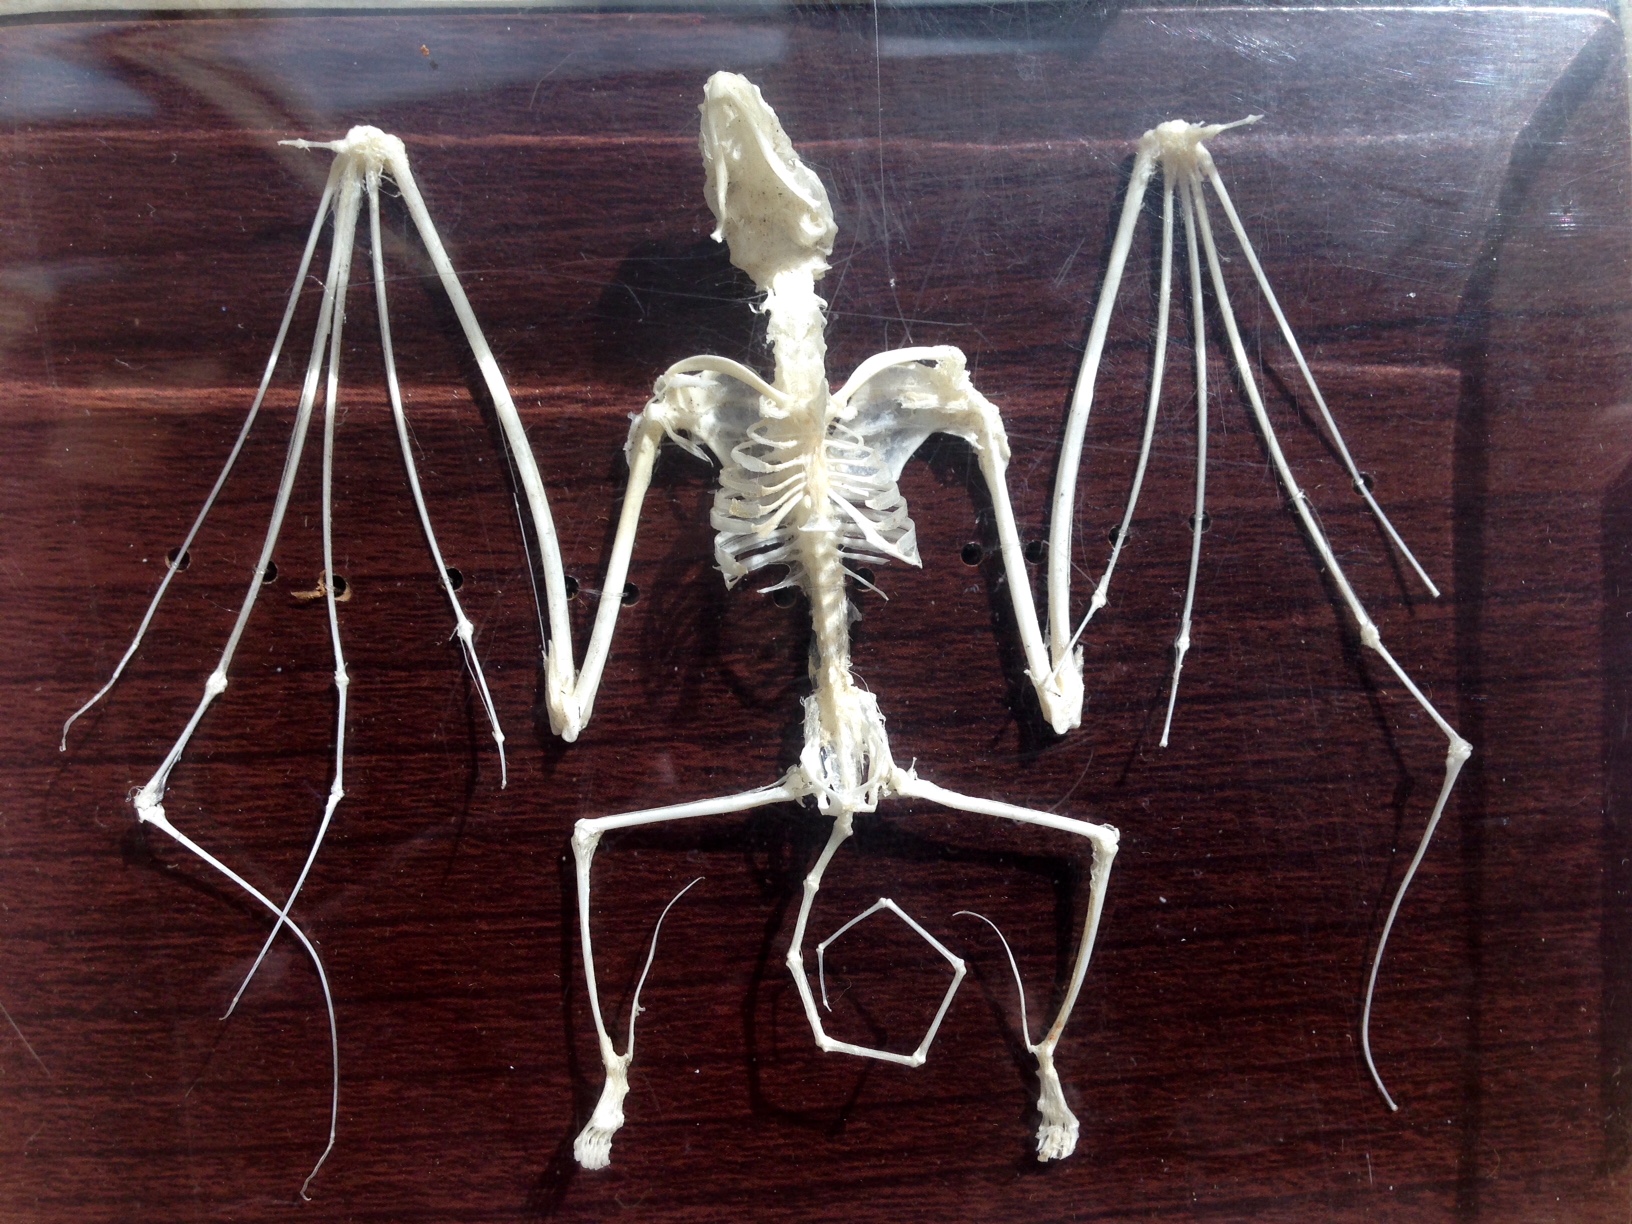 This bat skeleton shows that the fingers of a bat make up most of its wings. (Photo by Angela Denning, KFSK - Petersburg)